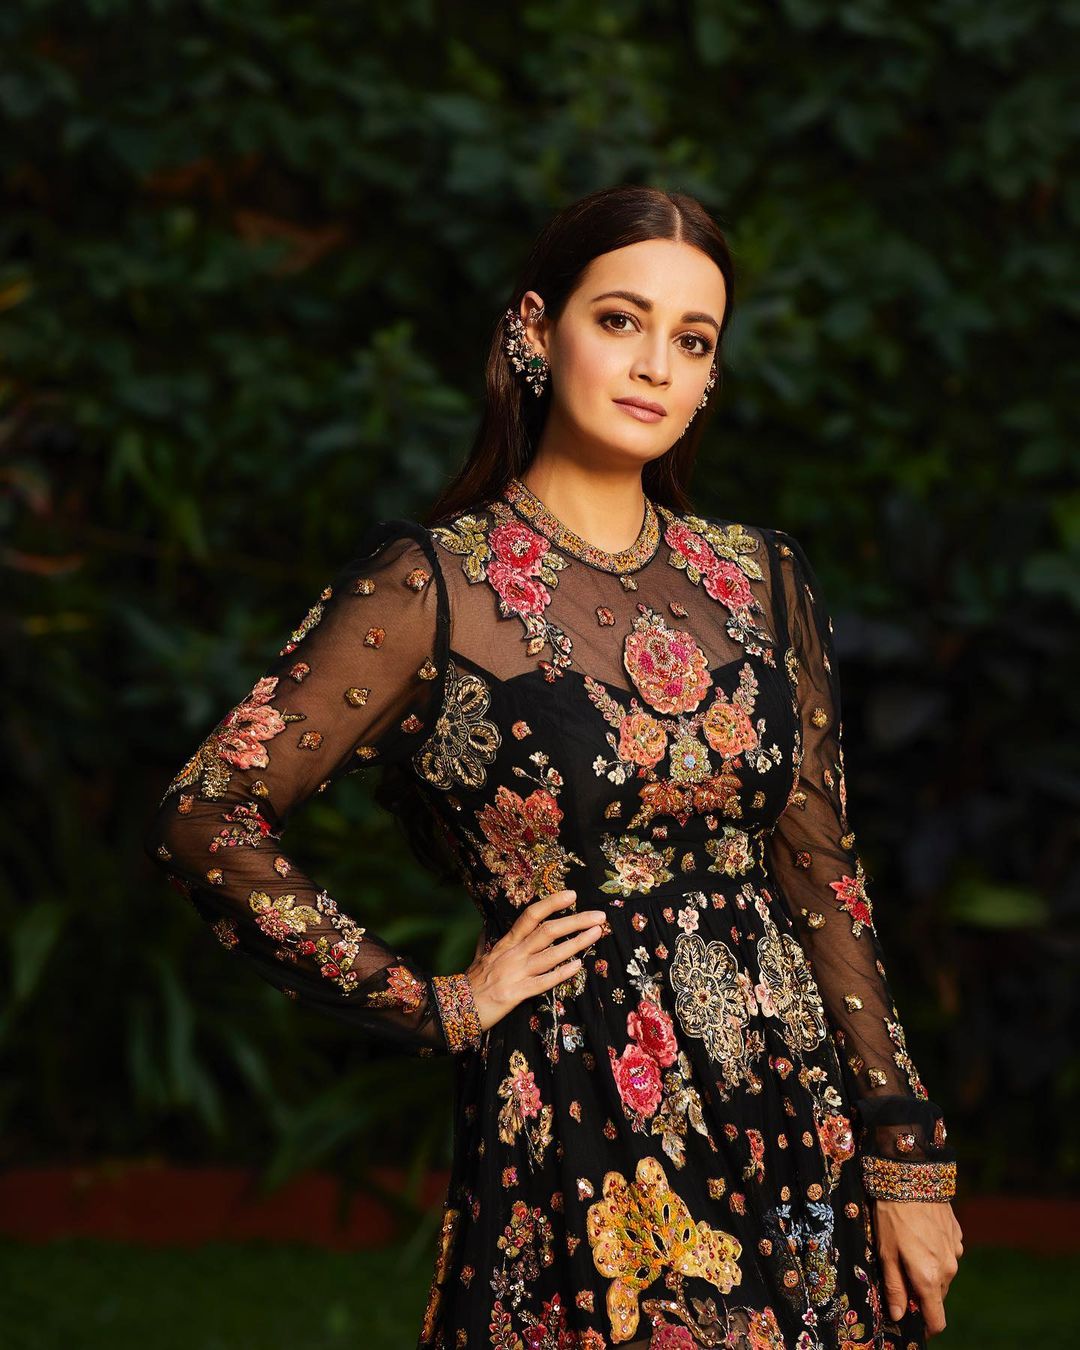 dia-mirza-s-floral-gown-memerising-looks